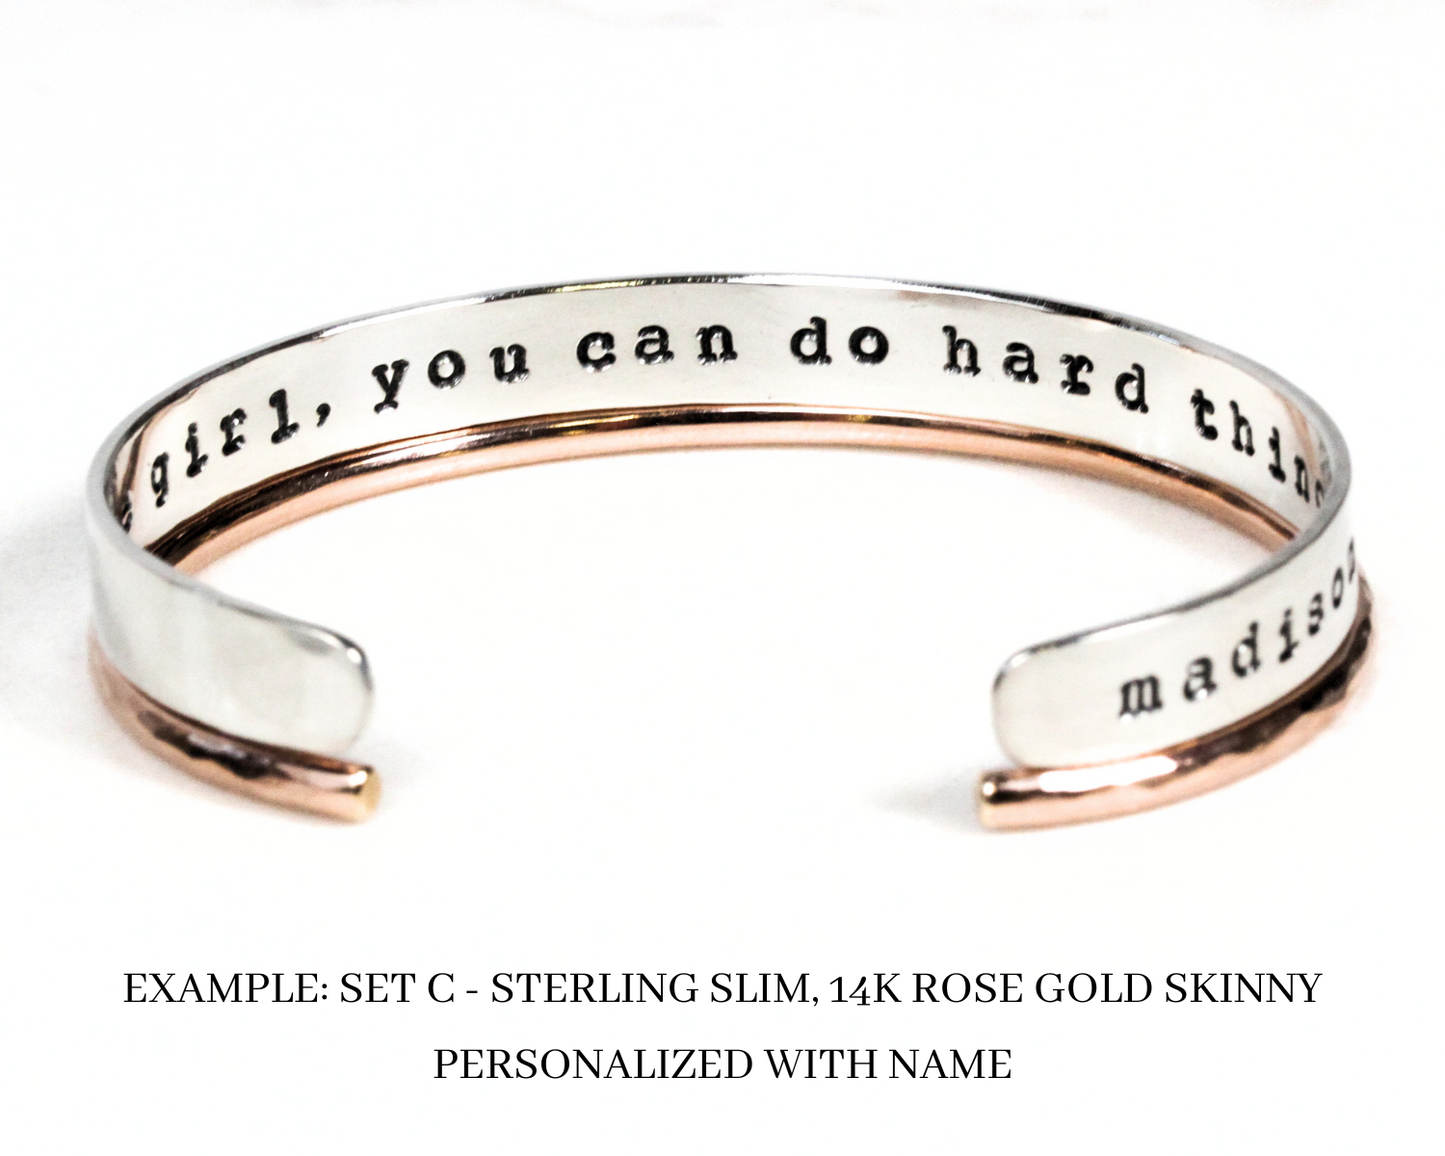 Brave Girl You Can Do Hard Things Cuff Set